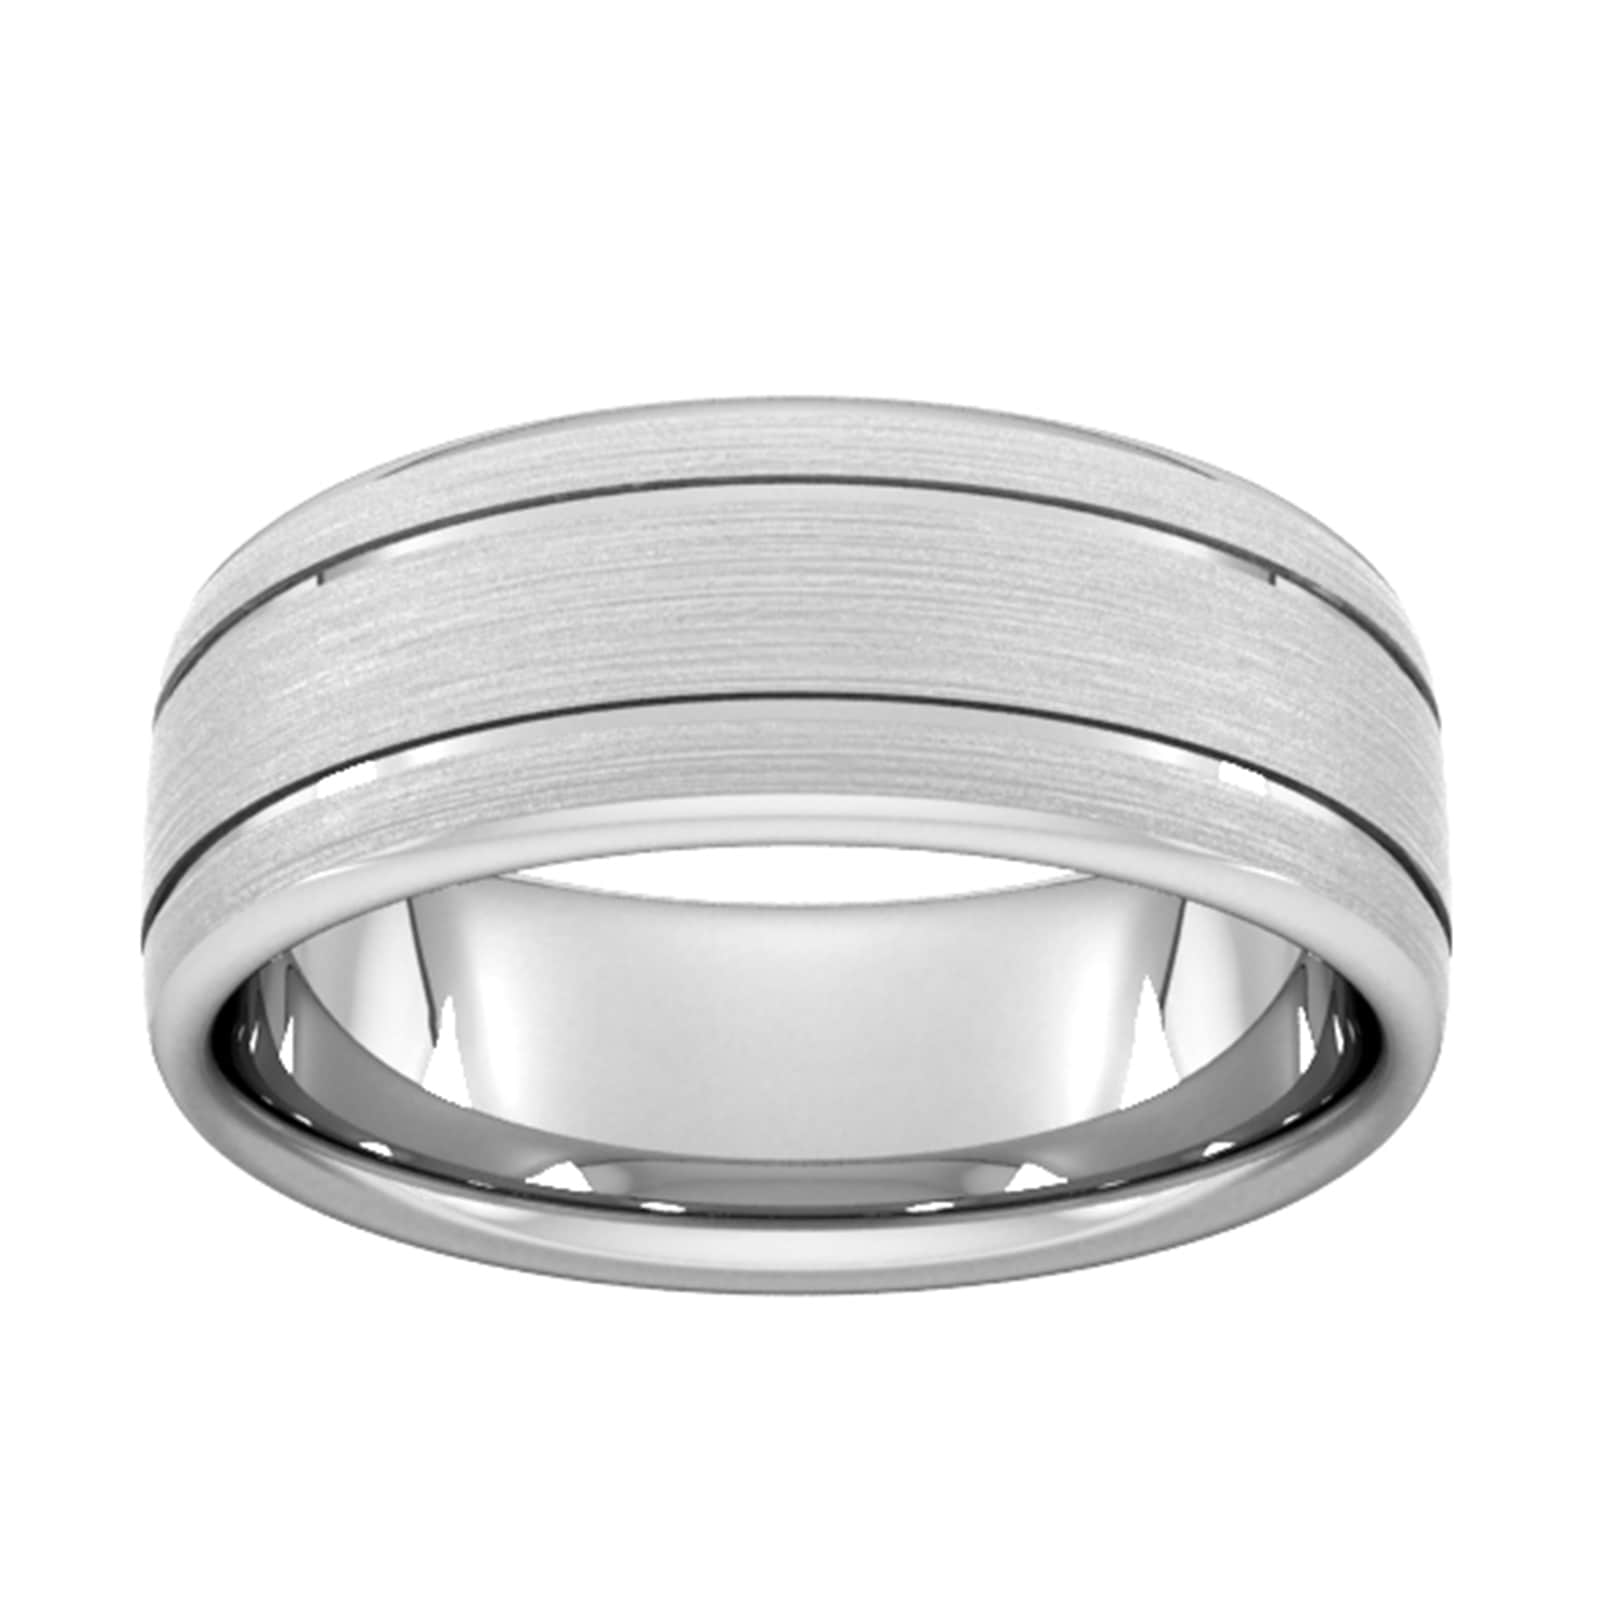 8mm Flat Court Heavy Matt Finish With Double Grooves Wedding Ring In 18 Carat White Gold - Ring Size T